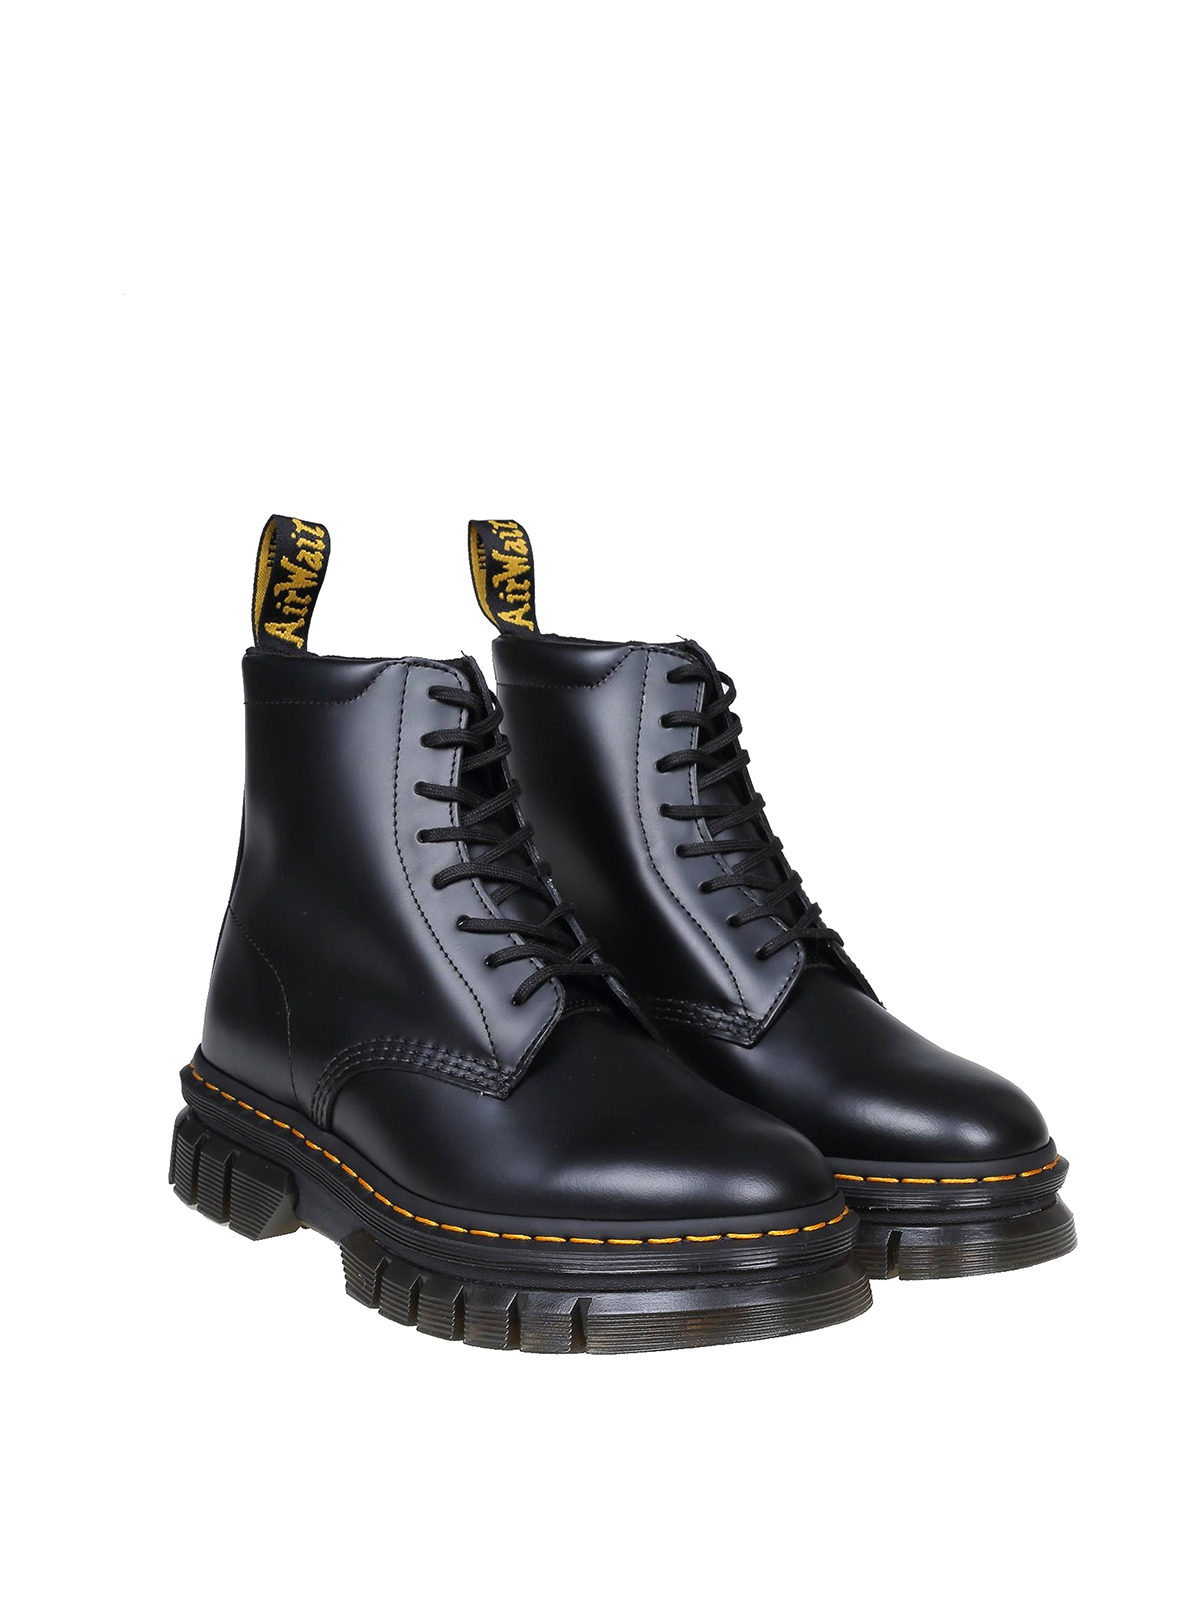 sextant Wiens Warmte Ankle boots Dr. Martens - Rikard ankle boots - 27833001 | iKRIX.com